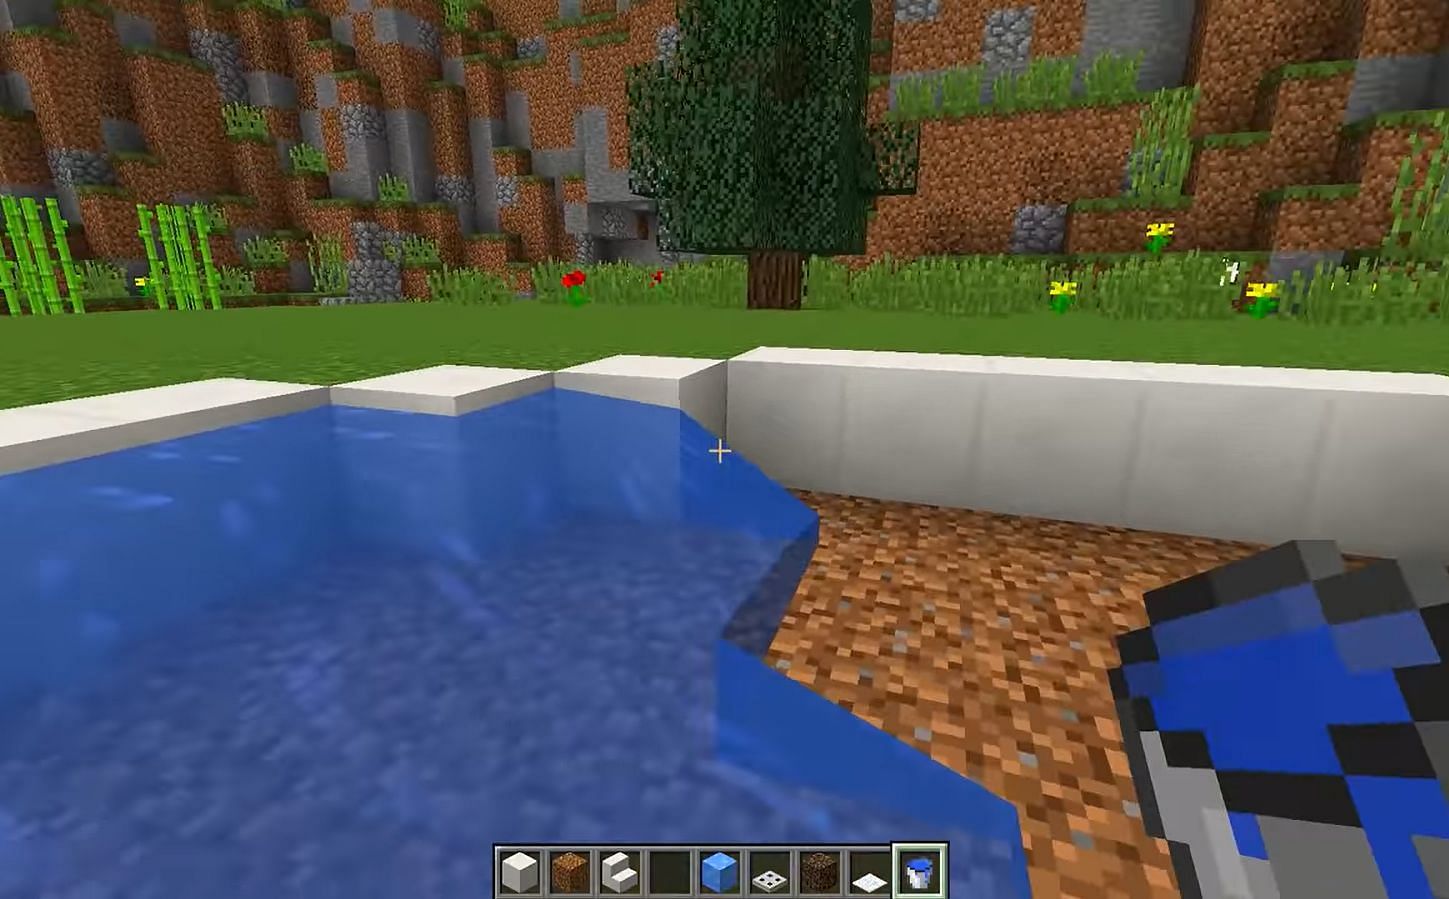 Filling pool with water (Image via YouTube Biggs87x)